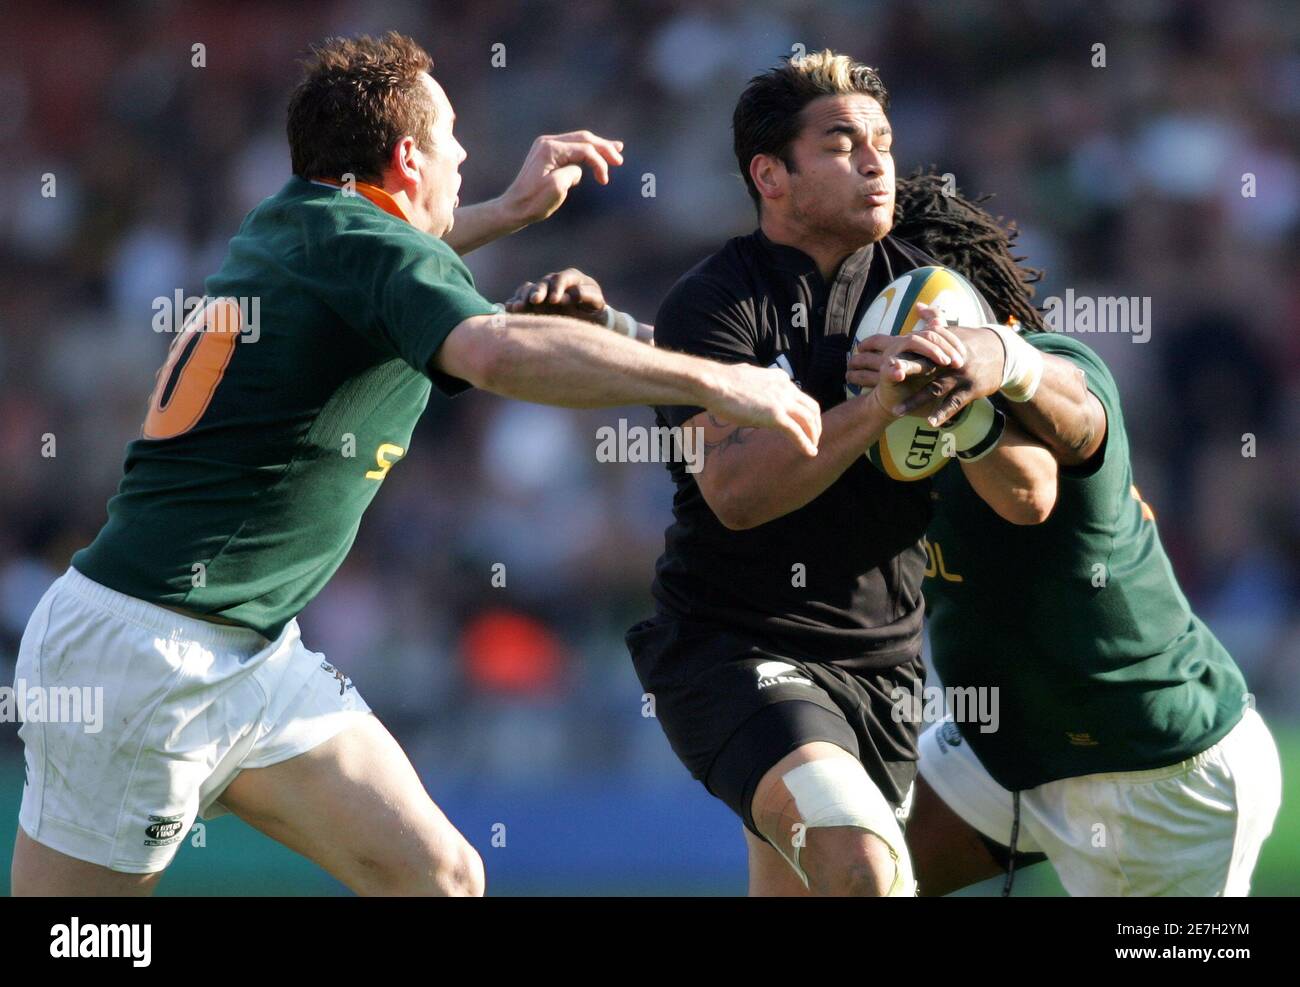 New Zealand's Piri Weepu (C) is tackled by South Africa's Butch Jame (L) and Solly Tyibilika during their Tri-Nations rugby union match in Pretoria, South Africa  August 26, 2006.  REUTERS/Howard Burditt (SOUTH AFRICA) Stock Photo